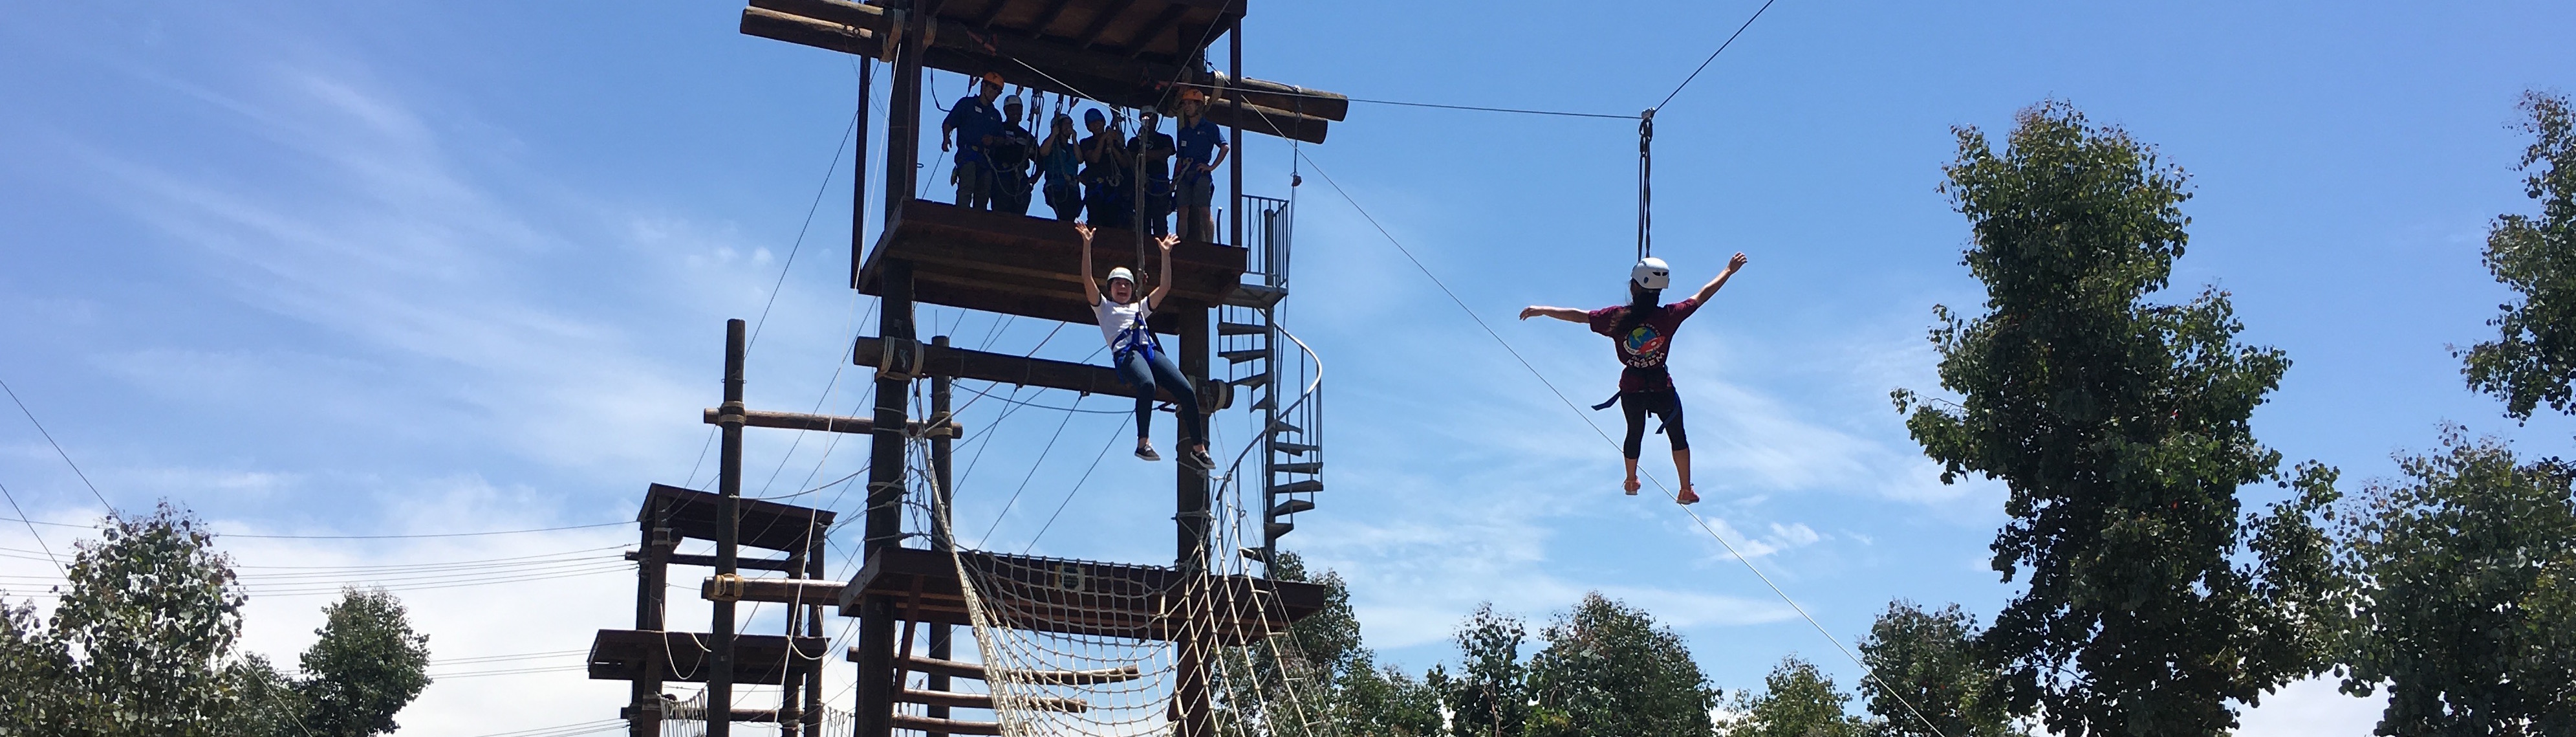 tw students zip-lining at UCSD's Ropes course